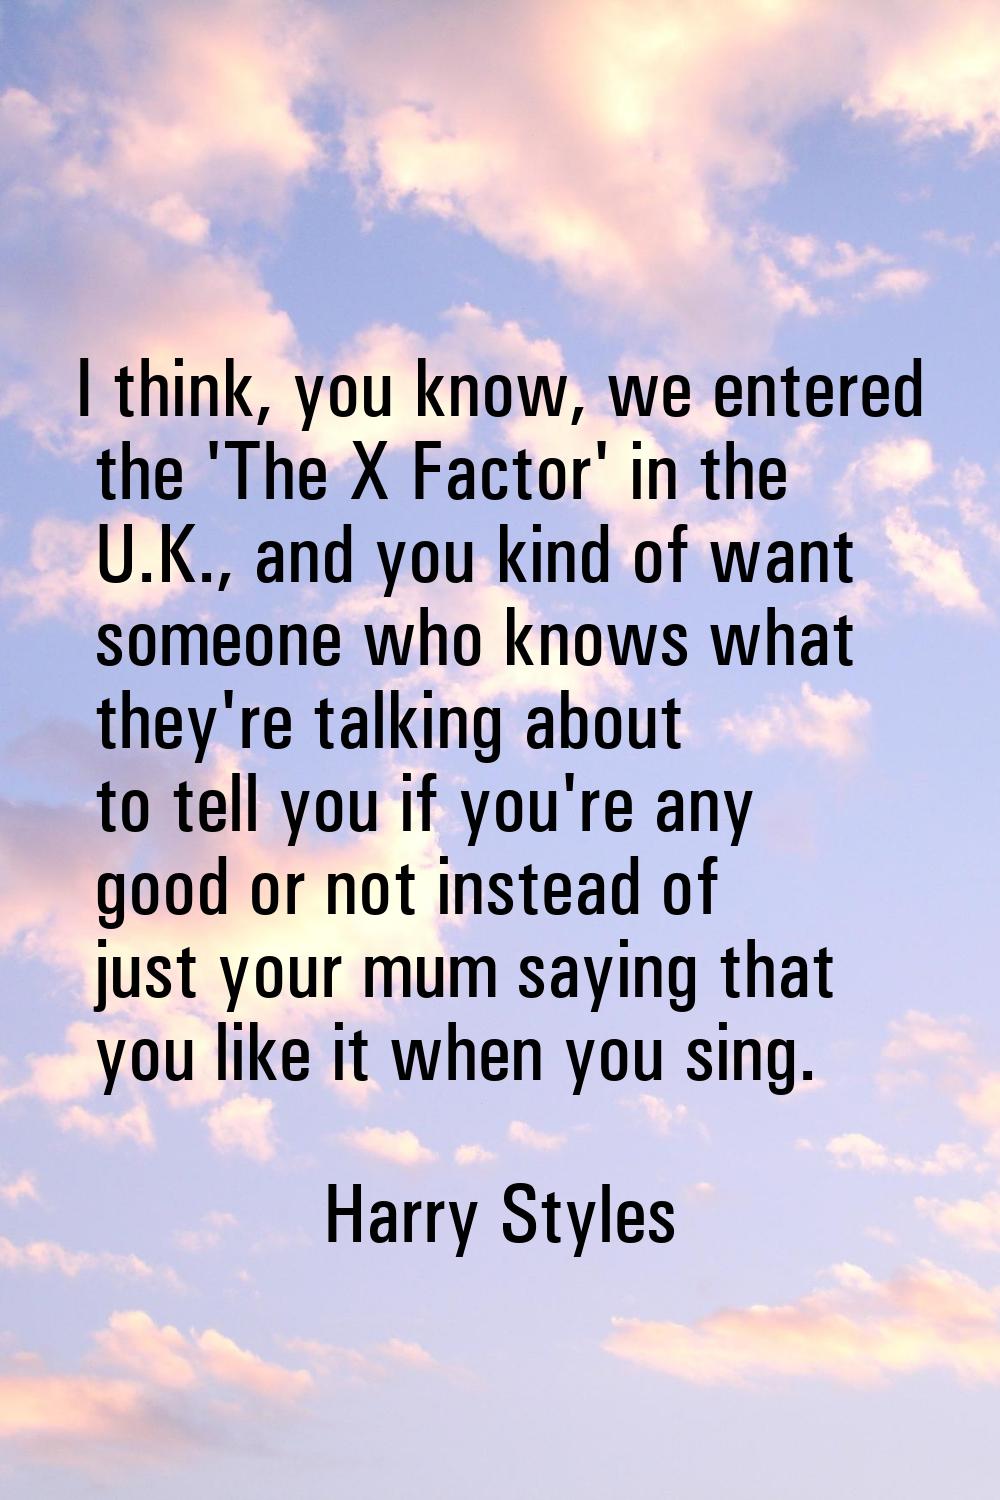 I think, you know, we entered the 'The X Factor' in the U.K., and you kind of want someone who know